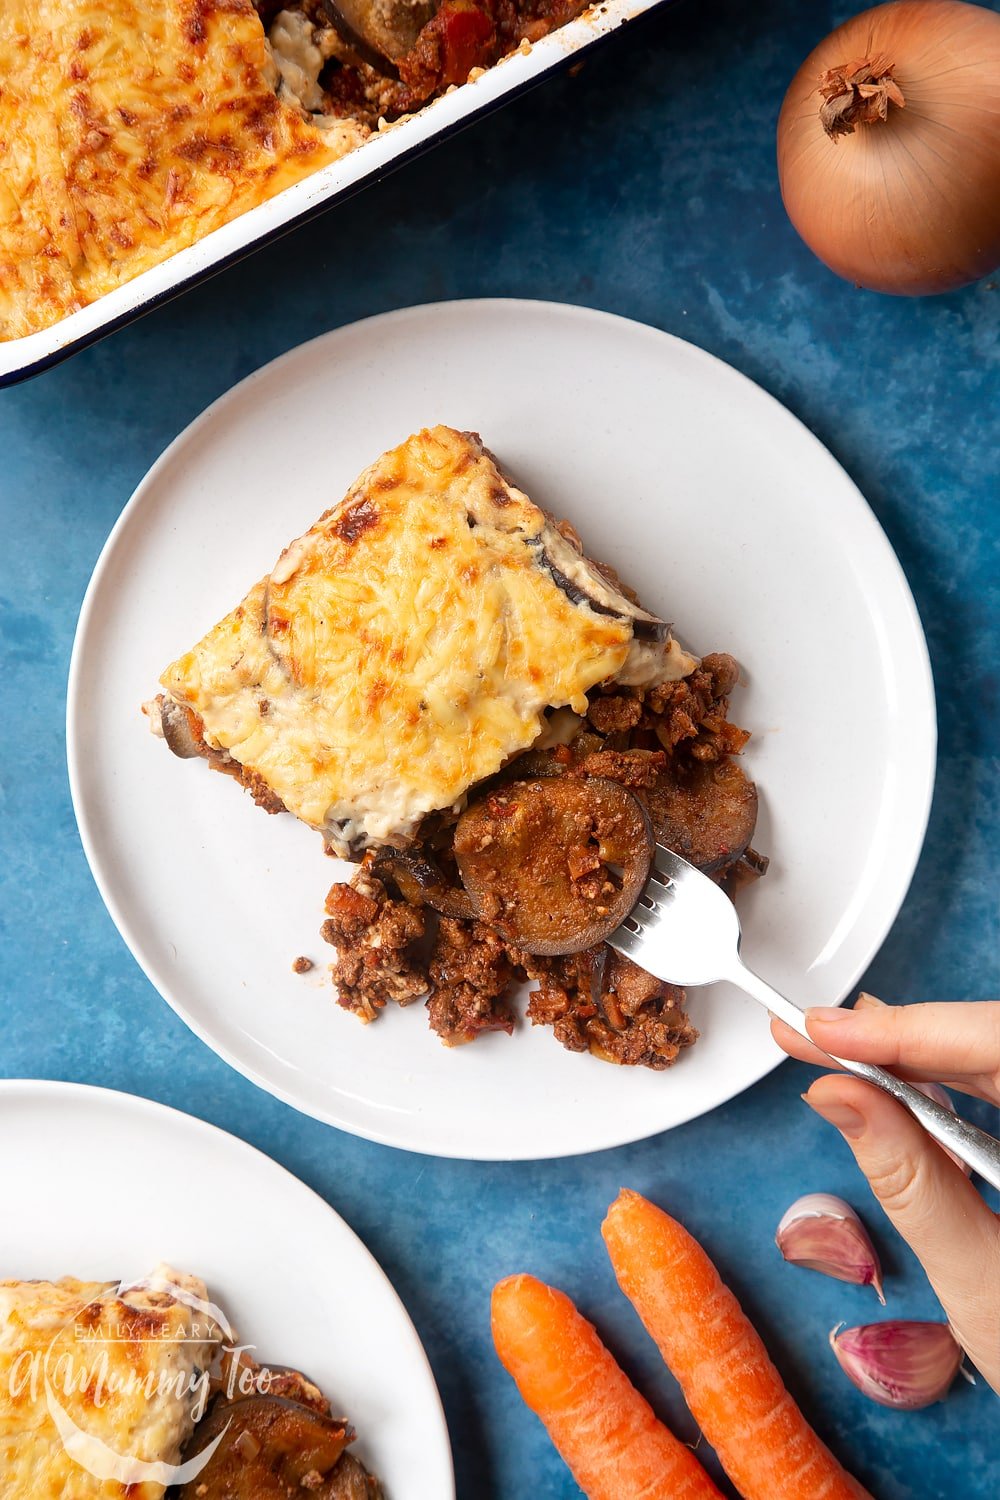 Overhead shot of a hand holding a fork picking up aubergine from Quorn Meat Free Mince Moussaka served on a white plate with logo in the lower-left corner